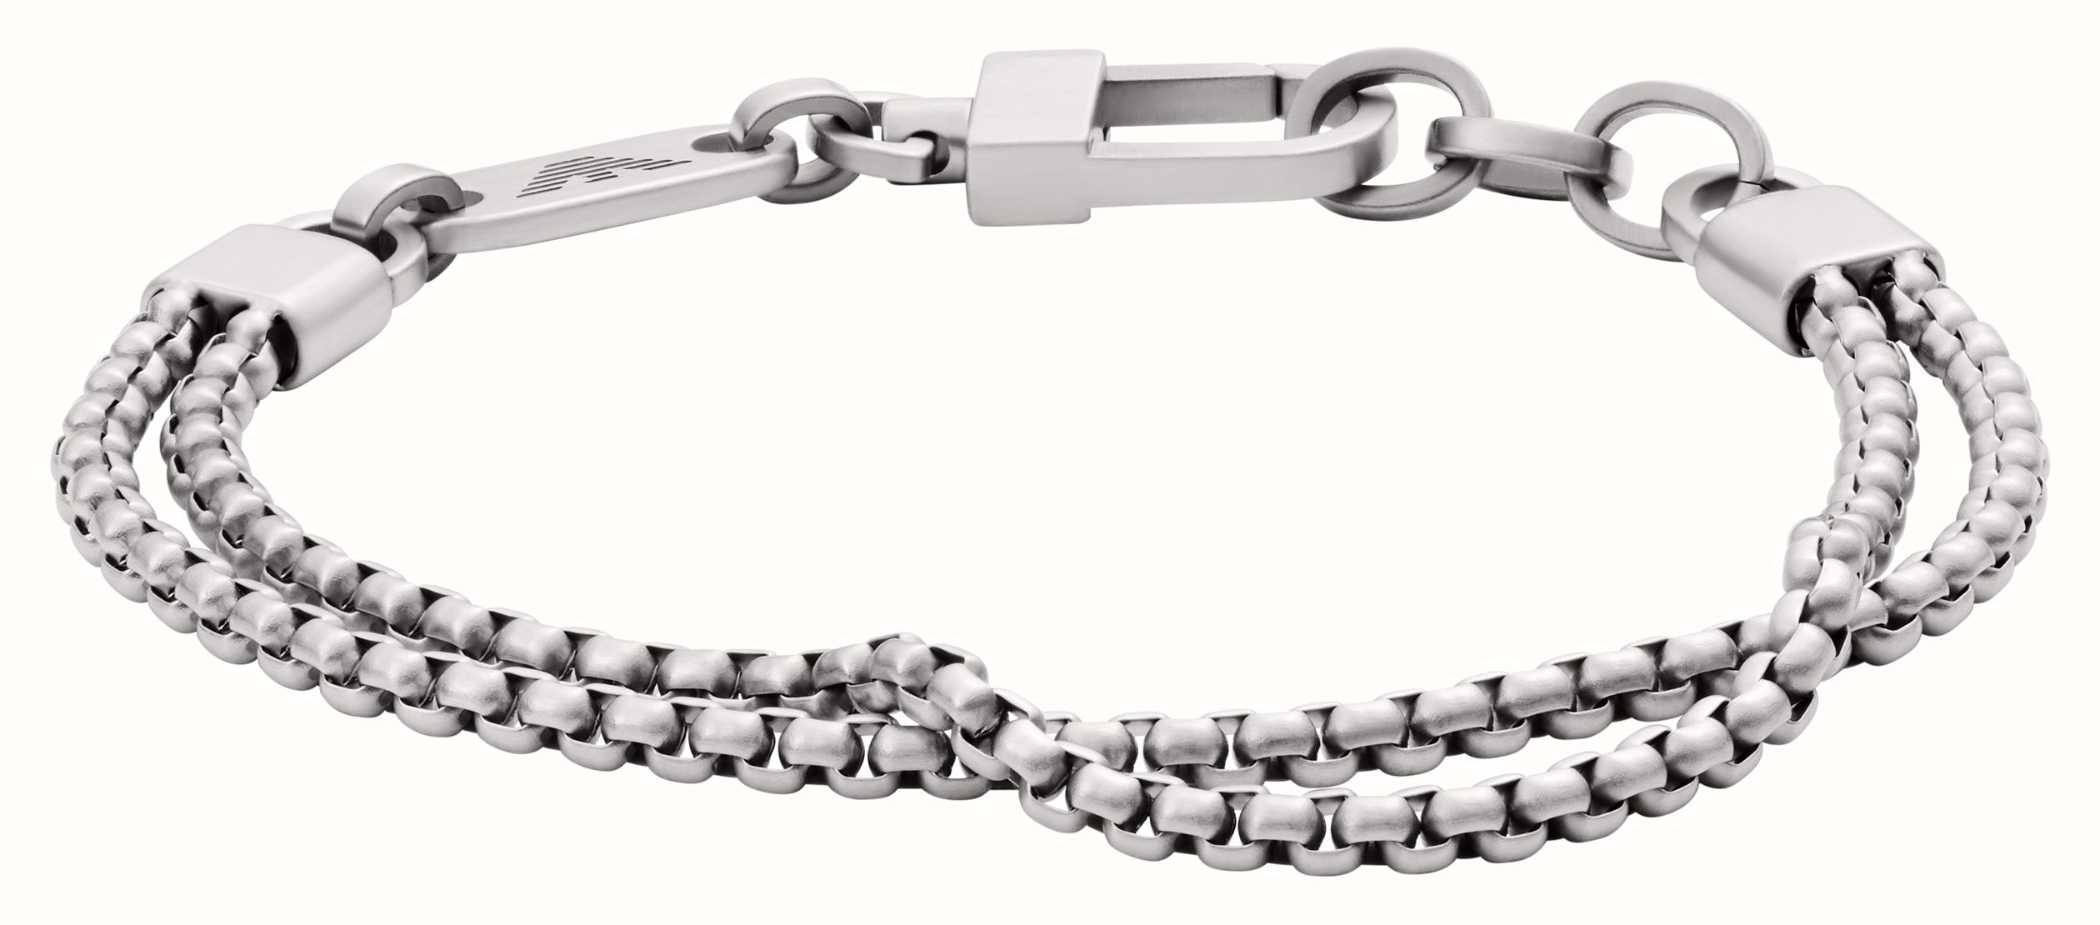 Armani Emporio Watches™ Bracelet EGS2805040 Chain Men\'s Asymmetrical Class USA Steel Stainless - First